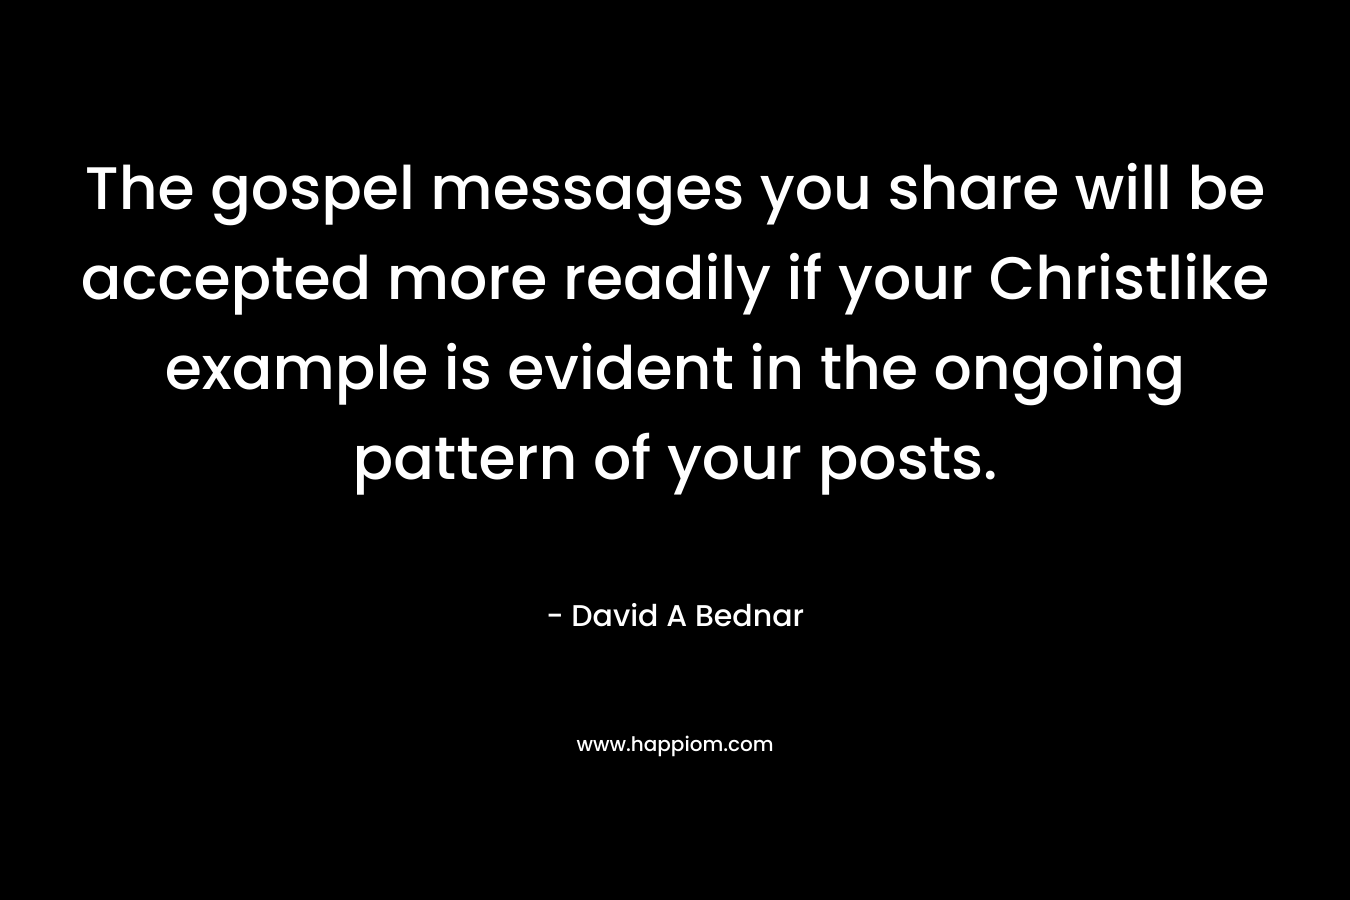 The gospel messages you share will be accepted more readily if your Christlike example is evident in the ongoing pattern of your posts. – David A Bednar